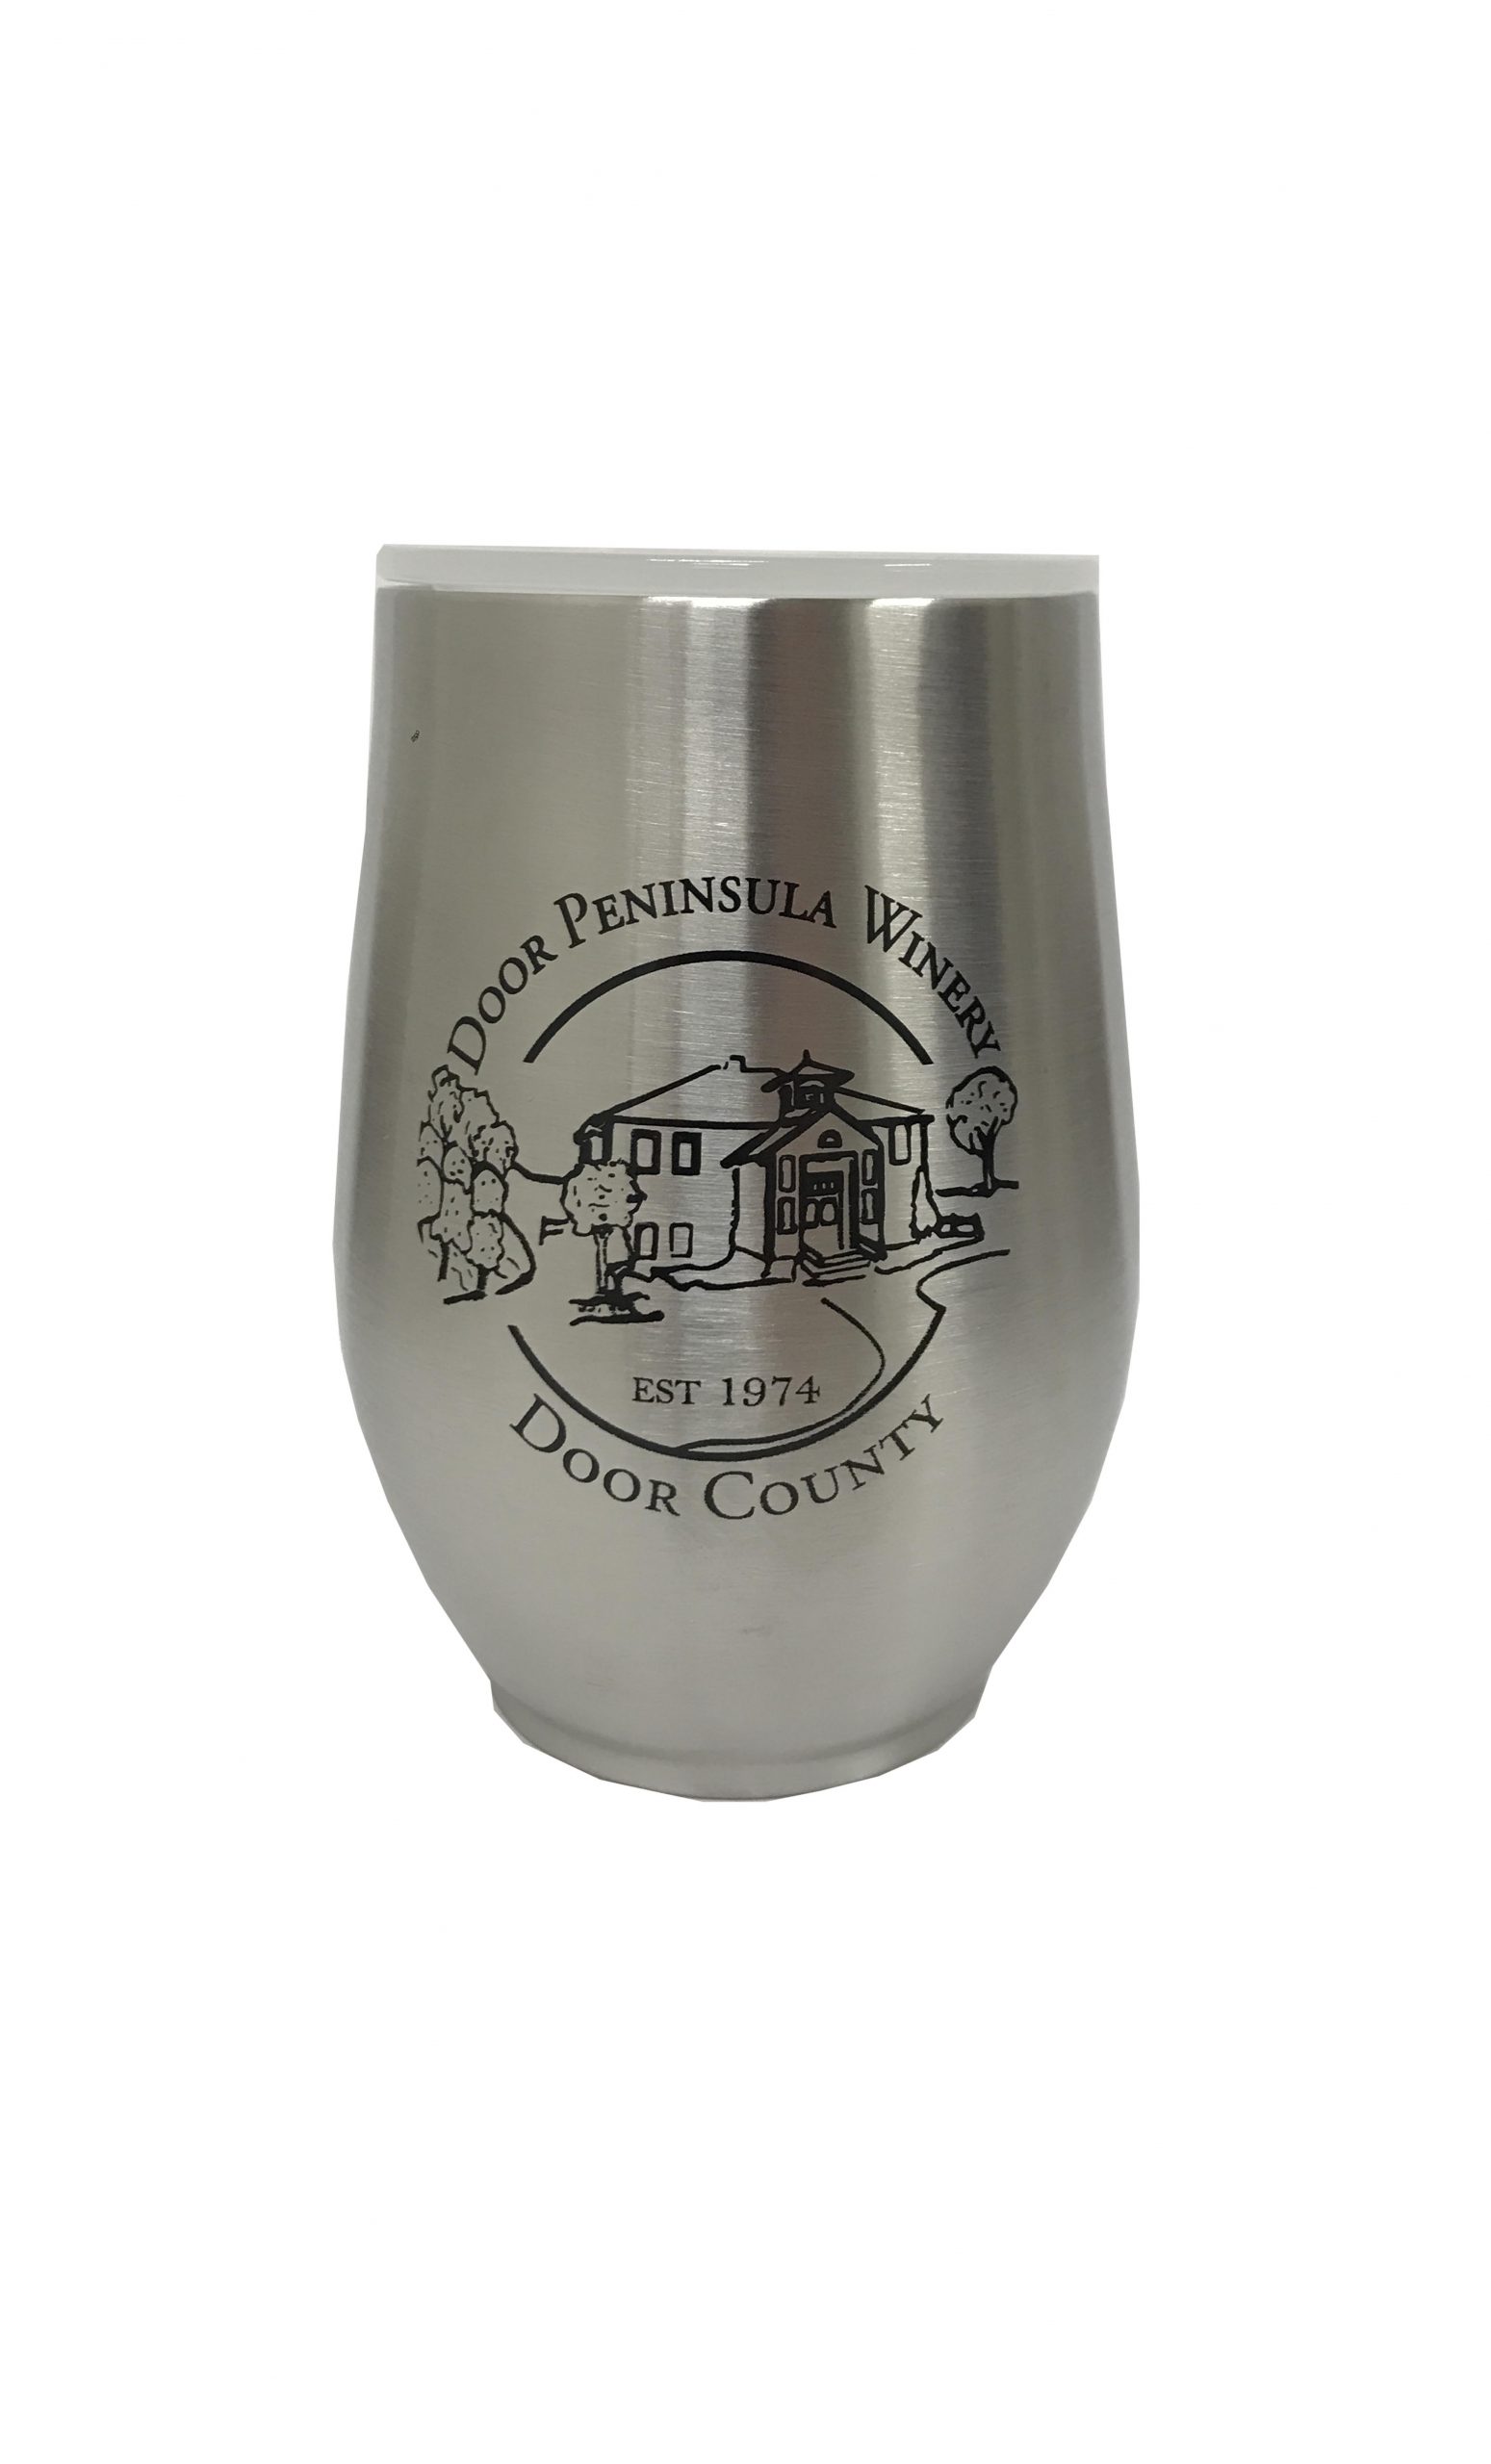 https://store.dcwine.com/winery/wp-content/uploads/2021/08/Stainless1-scaled.jpg